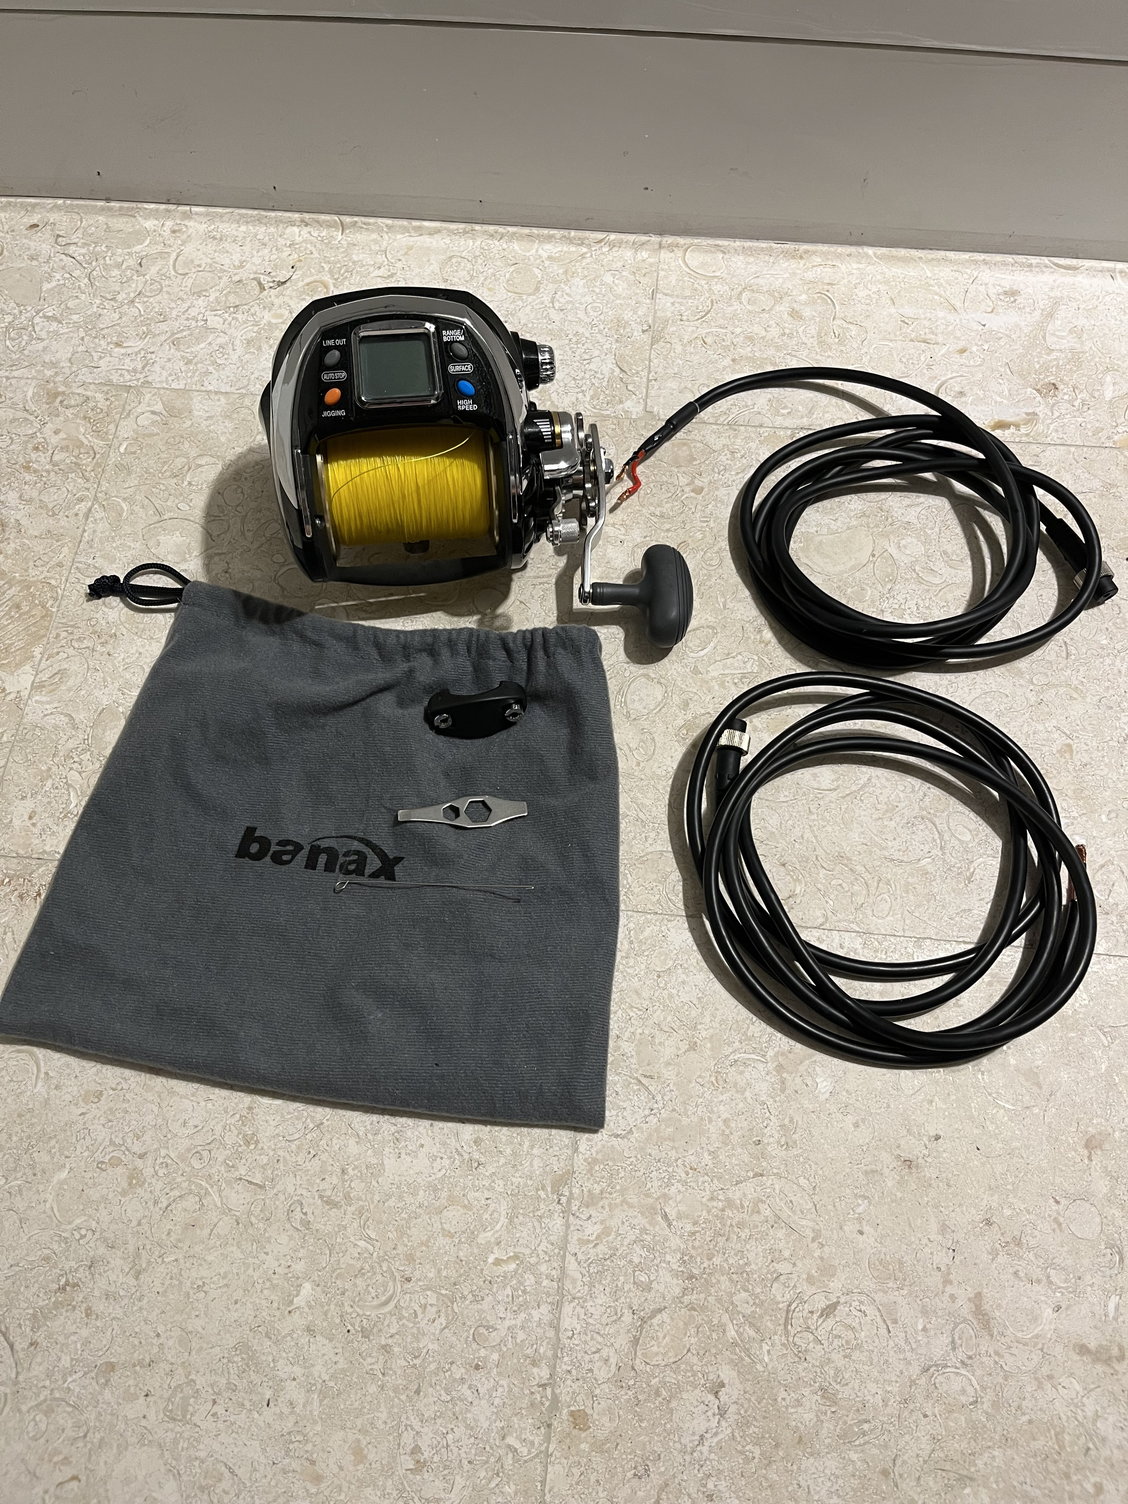 Banax Kaigen 1000/frigate deep drop combo for sale - The Hull Truth -  Boating and Fishing Forum